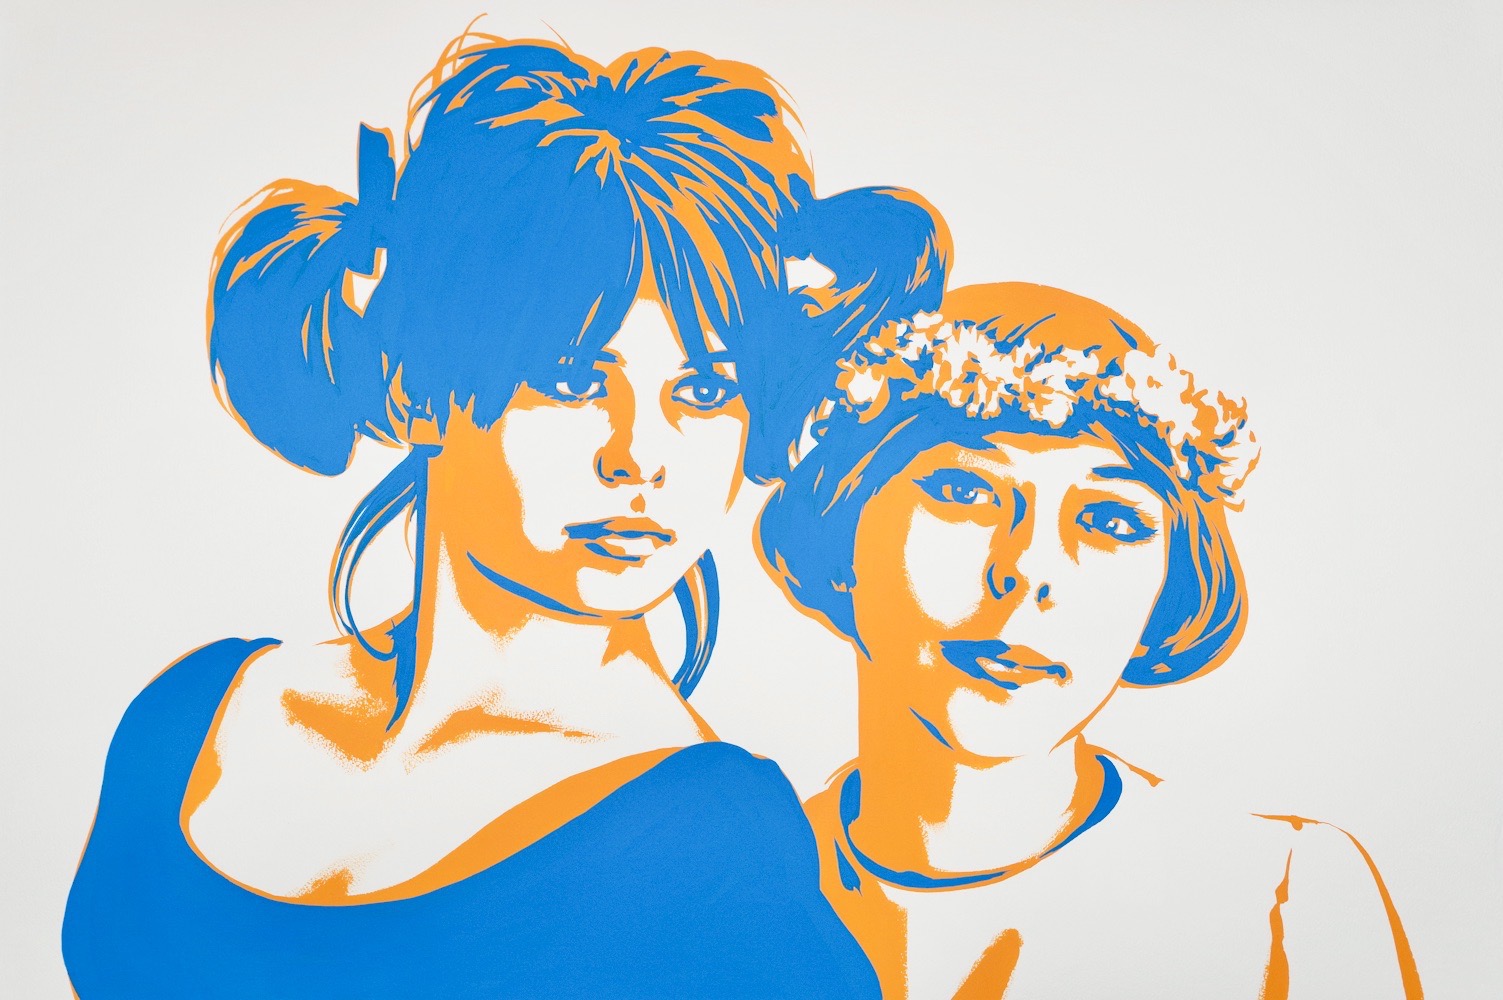 Jitka Cerhová and Ivana Karbanová (in Daisies 1966) 36x24 gouache on watercolor paper 2020